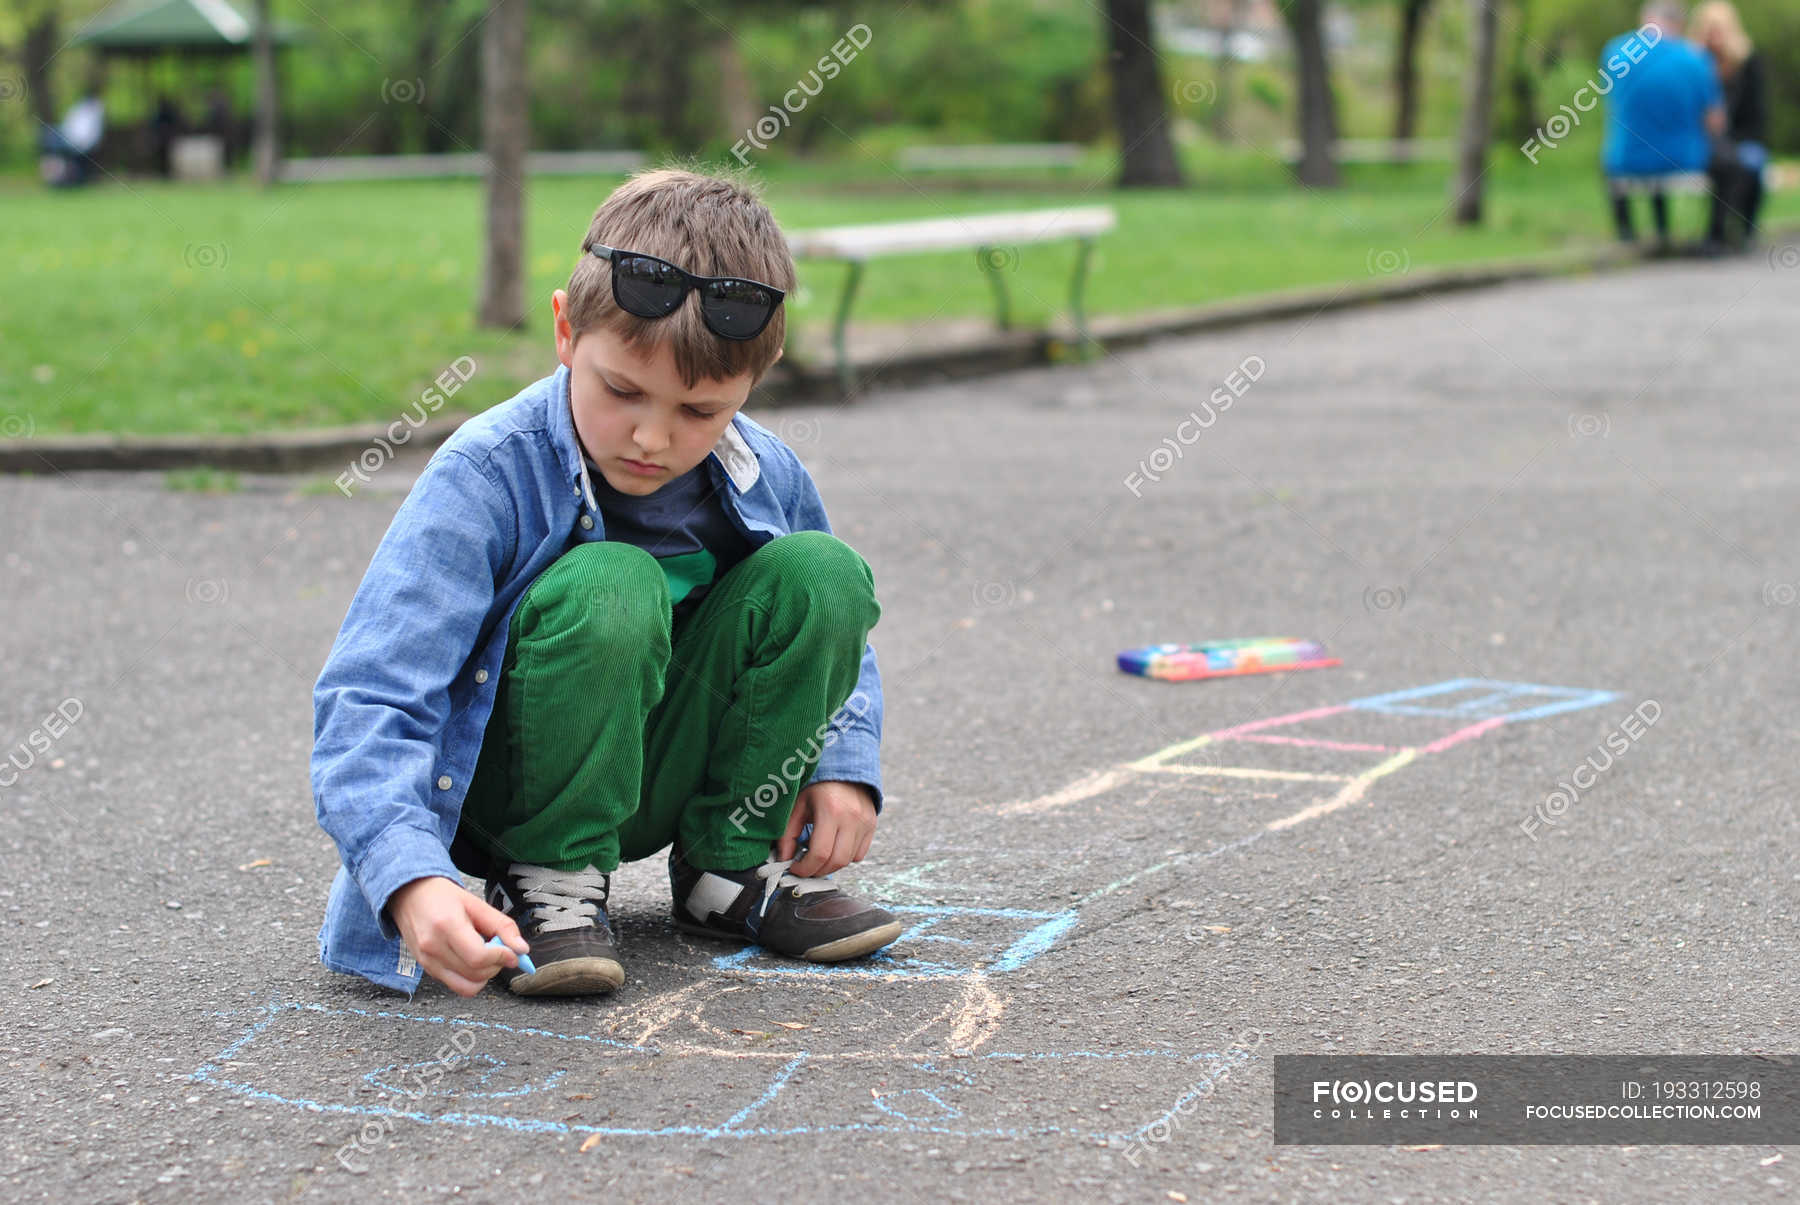 Play and Learn with the BEST Sidewalk Chalk Activities for Kids